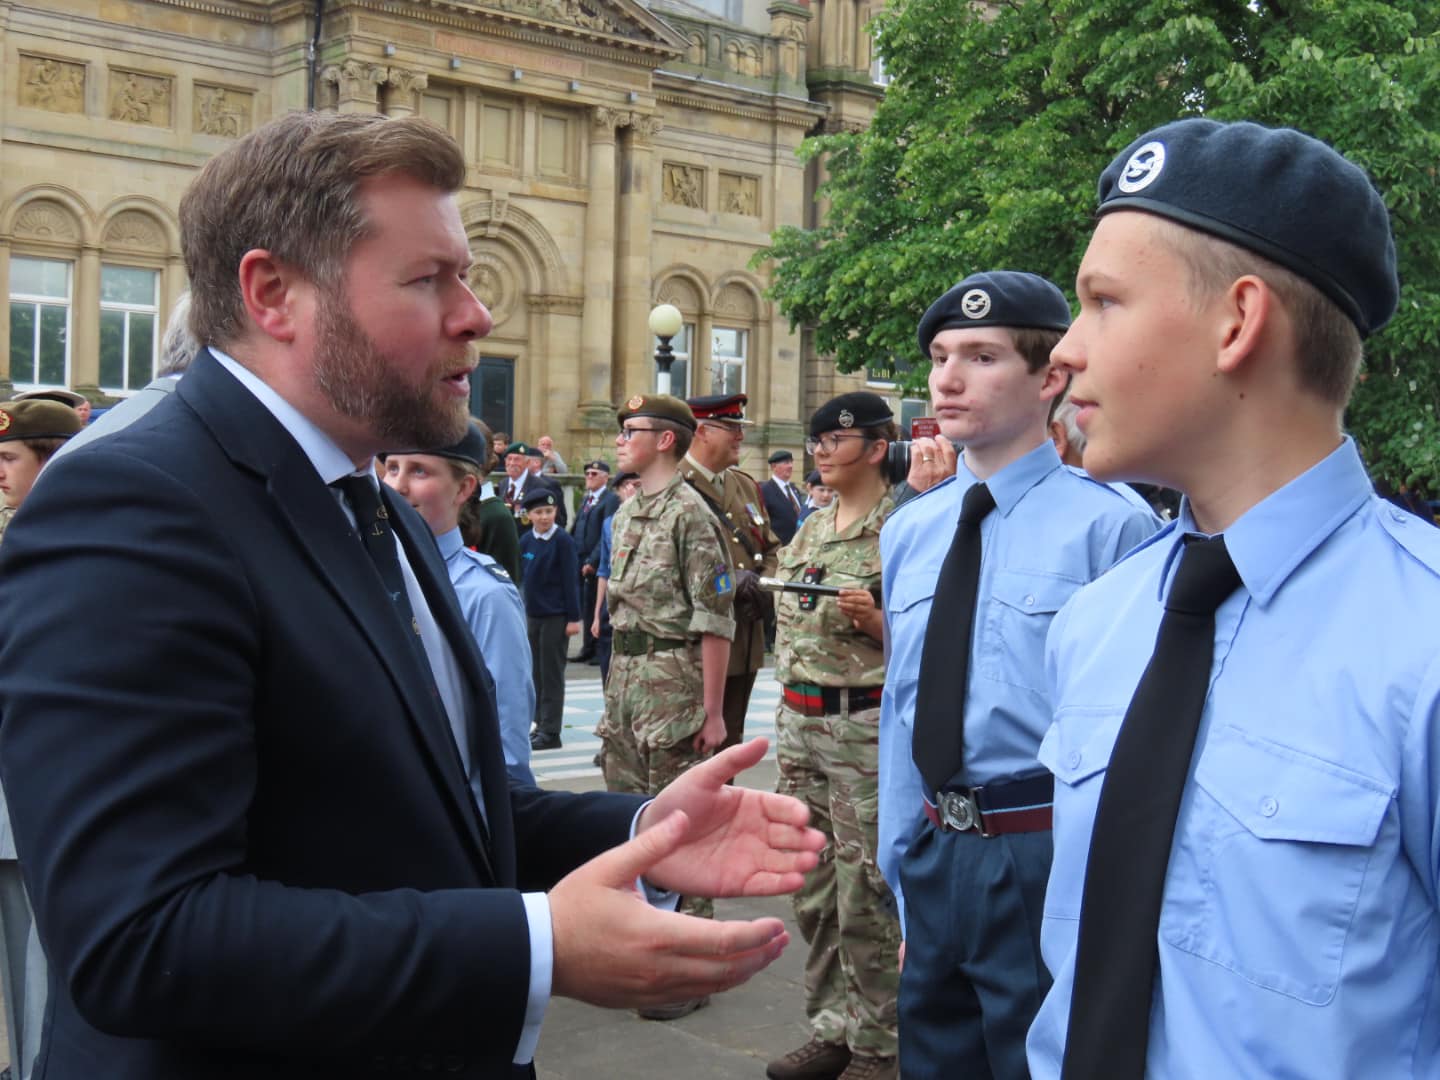 Southport MP Damien Moore at Armed Forces Day in Southport. Photo by Andrew Brown Media